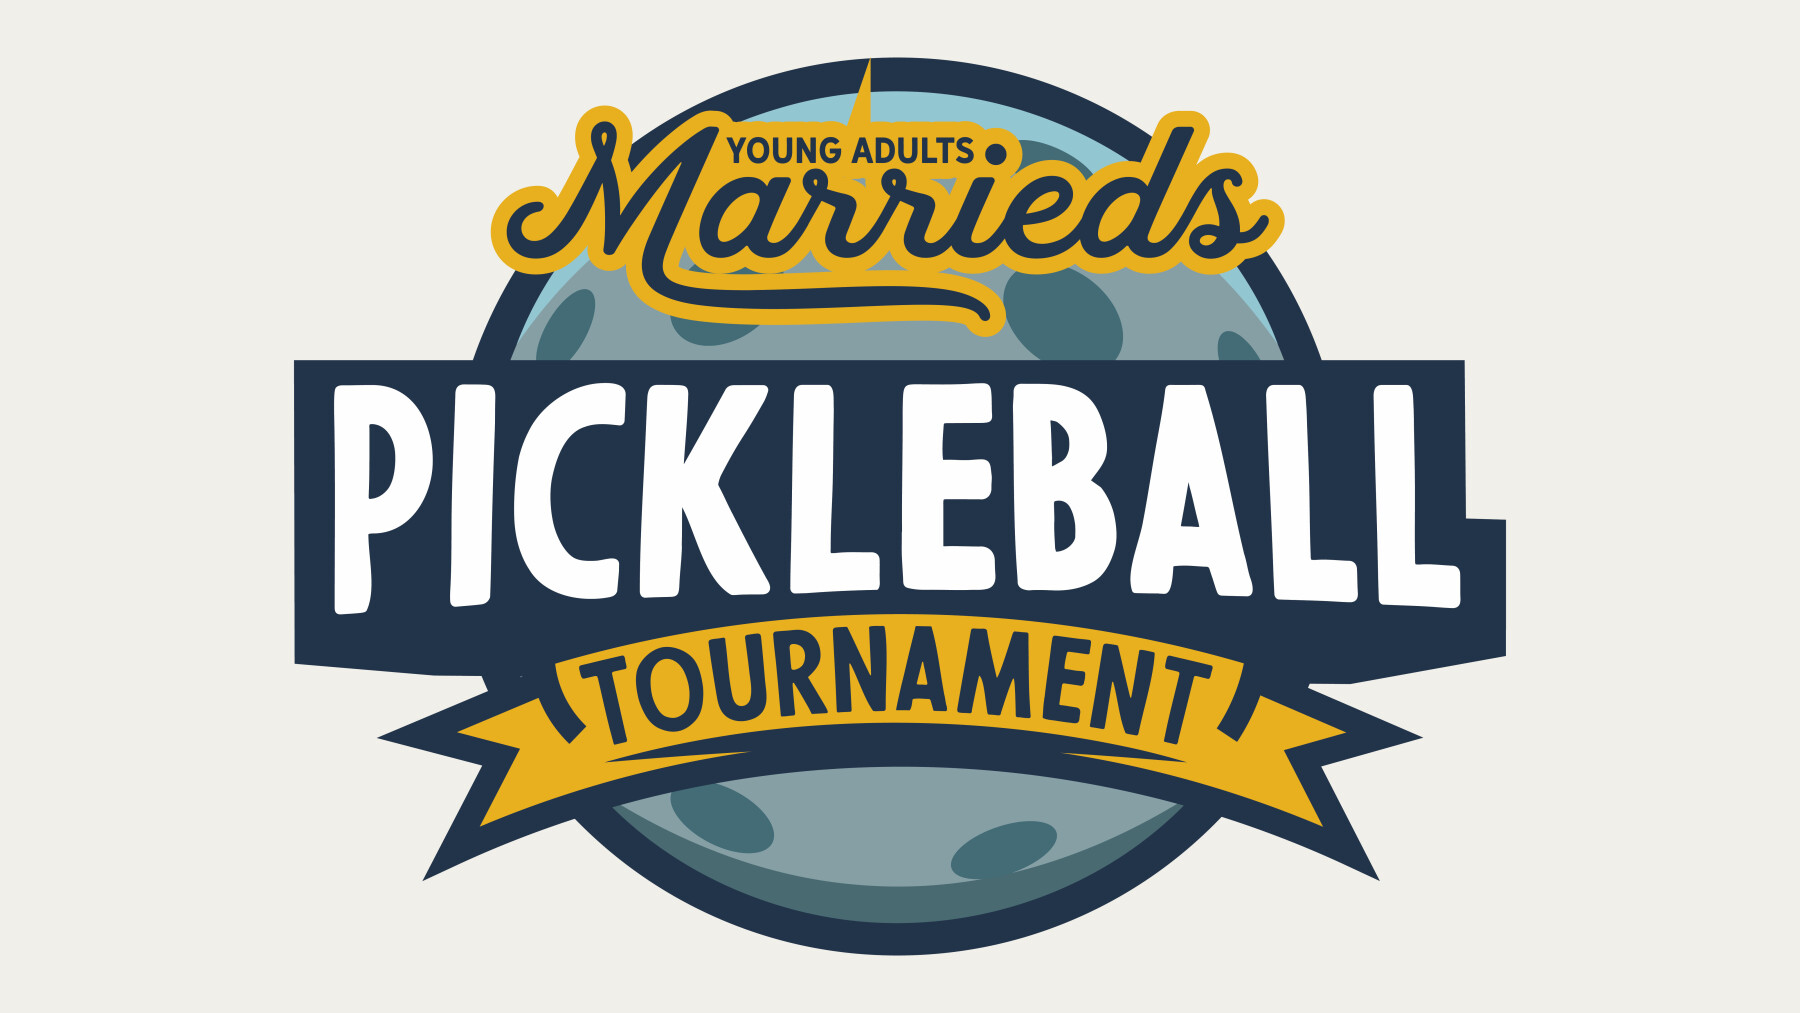 Young Adults: Marrieds Pickleball Tournament 